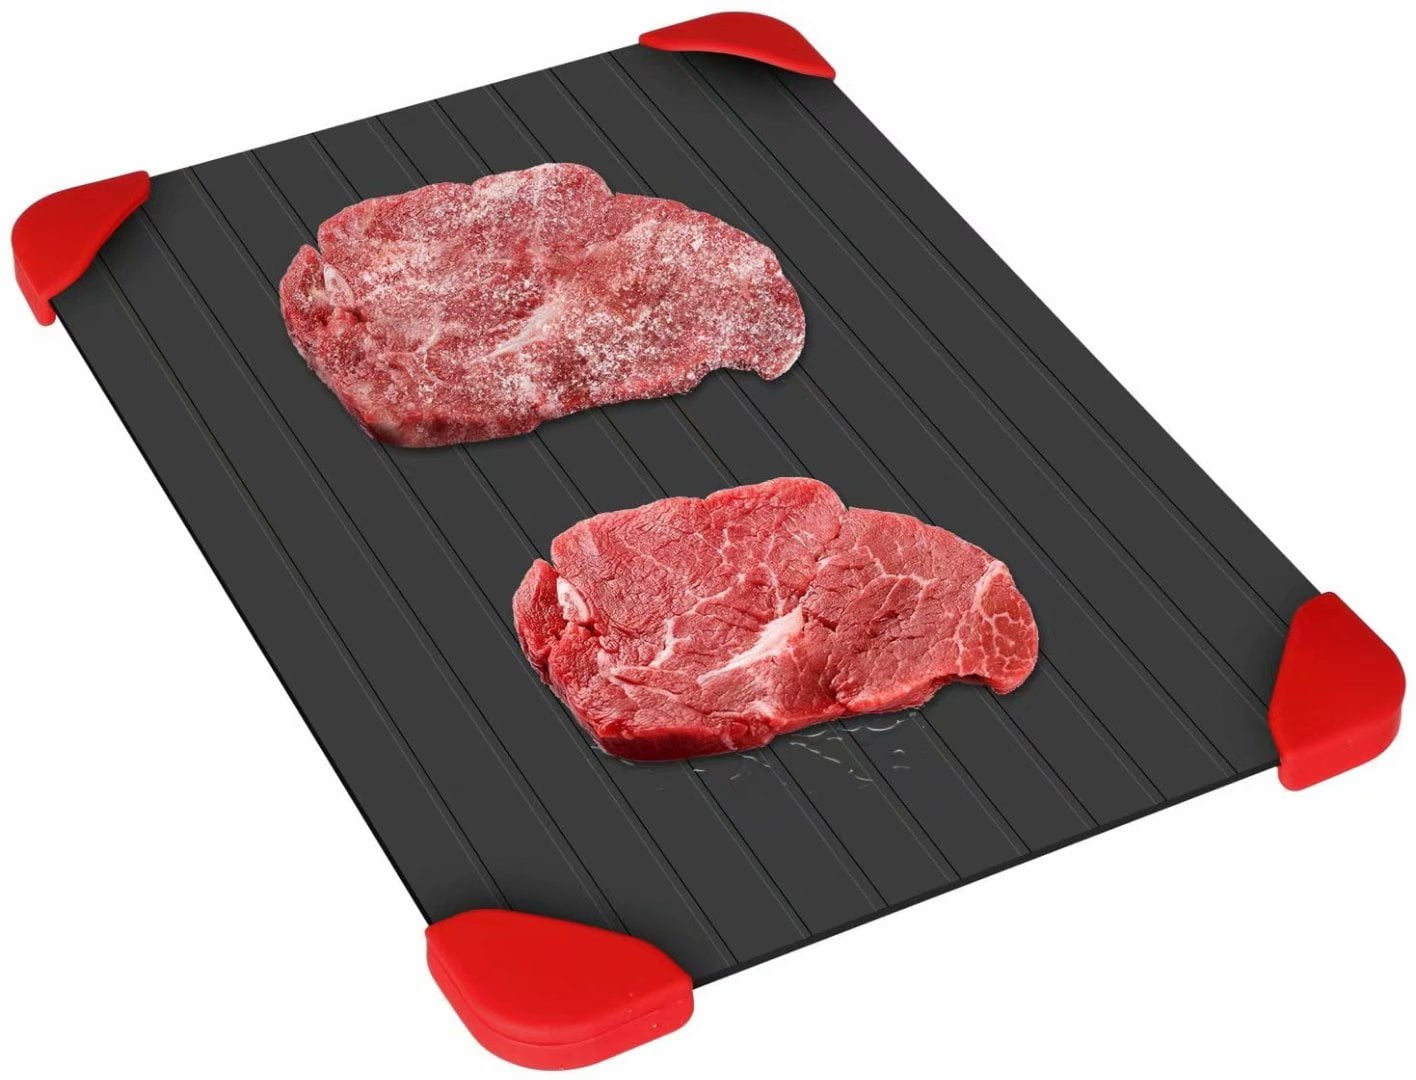 Details about   Fast Rapid Thawing Defrosting Tray Kitchen Safe Defrost Meat Thaw Frozen Food 